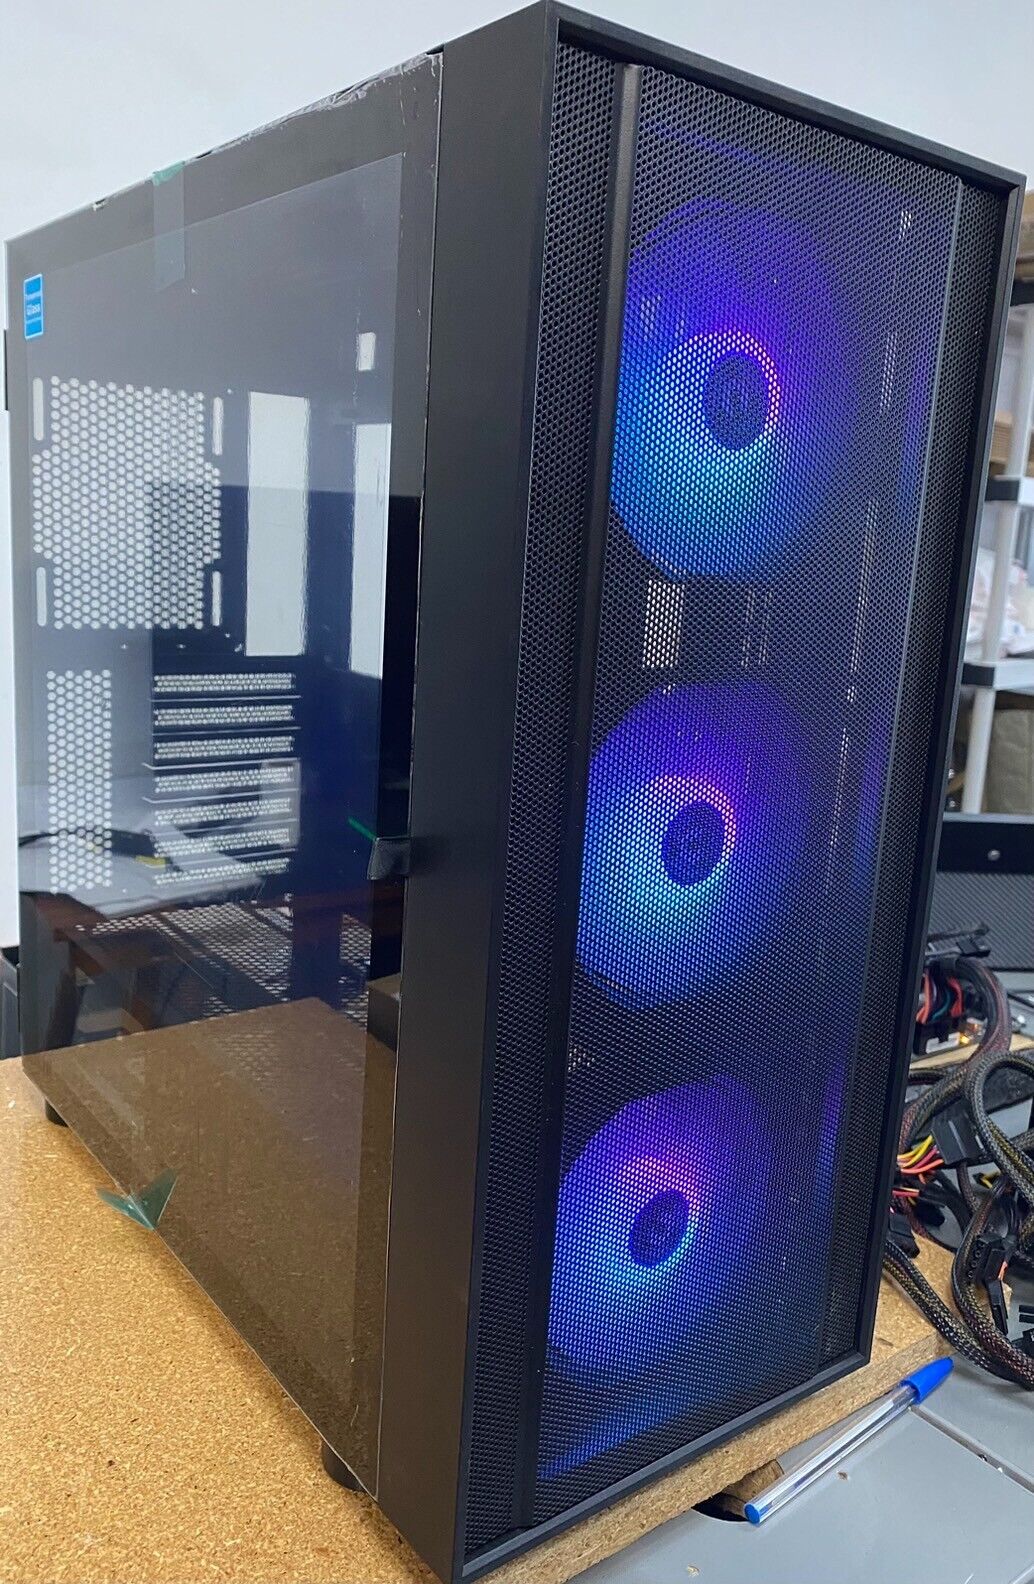 Thermaltake H570 TG Black ATX Mid Tower ARGB Tempered Glass Computer Case Chassi